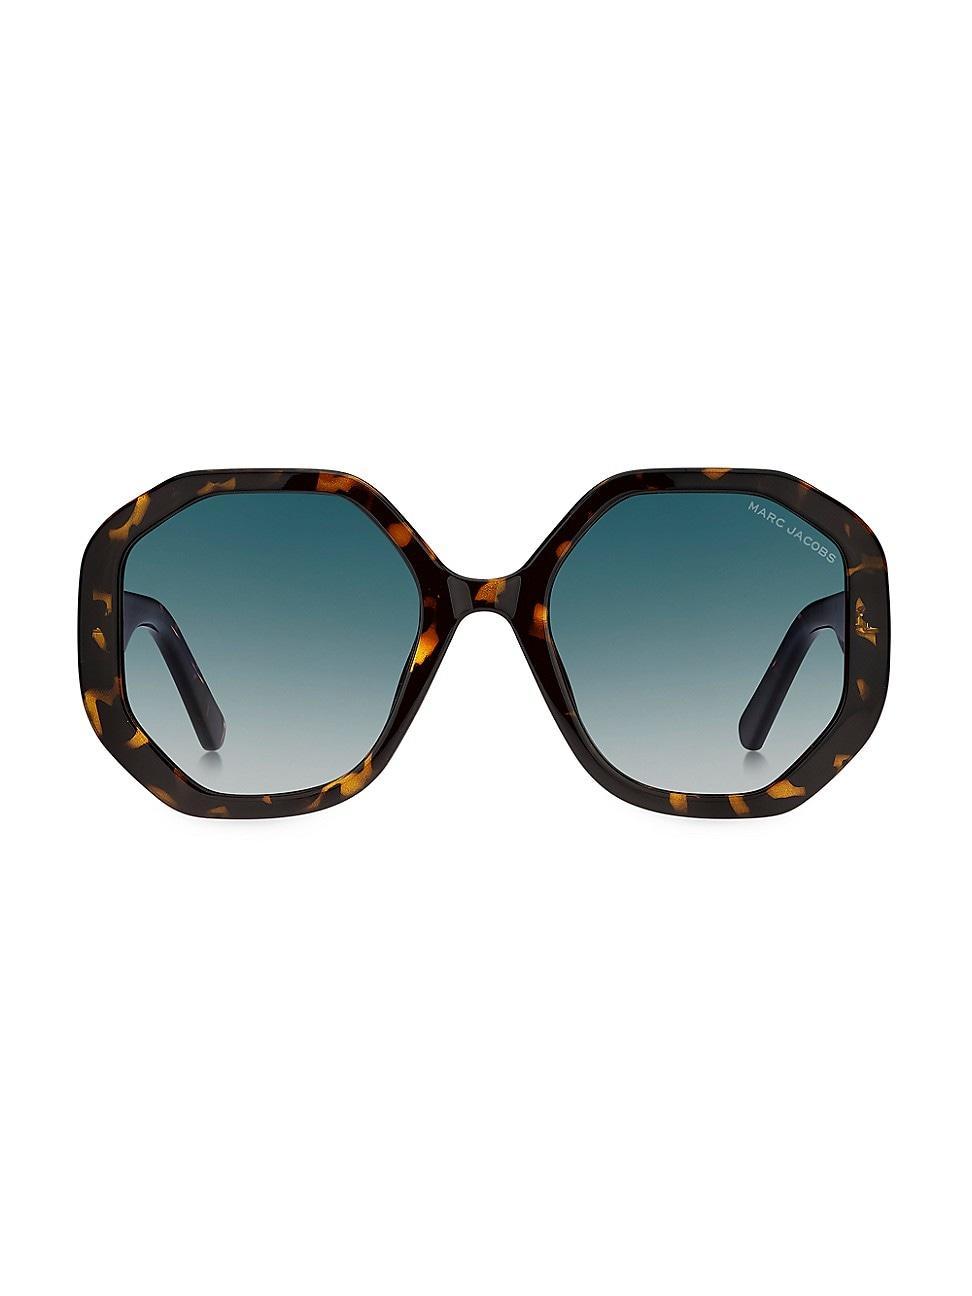 Marc Jacobs 53mm Gradient Round Sunglasses Product Image